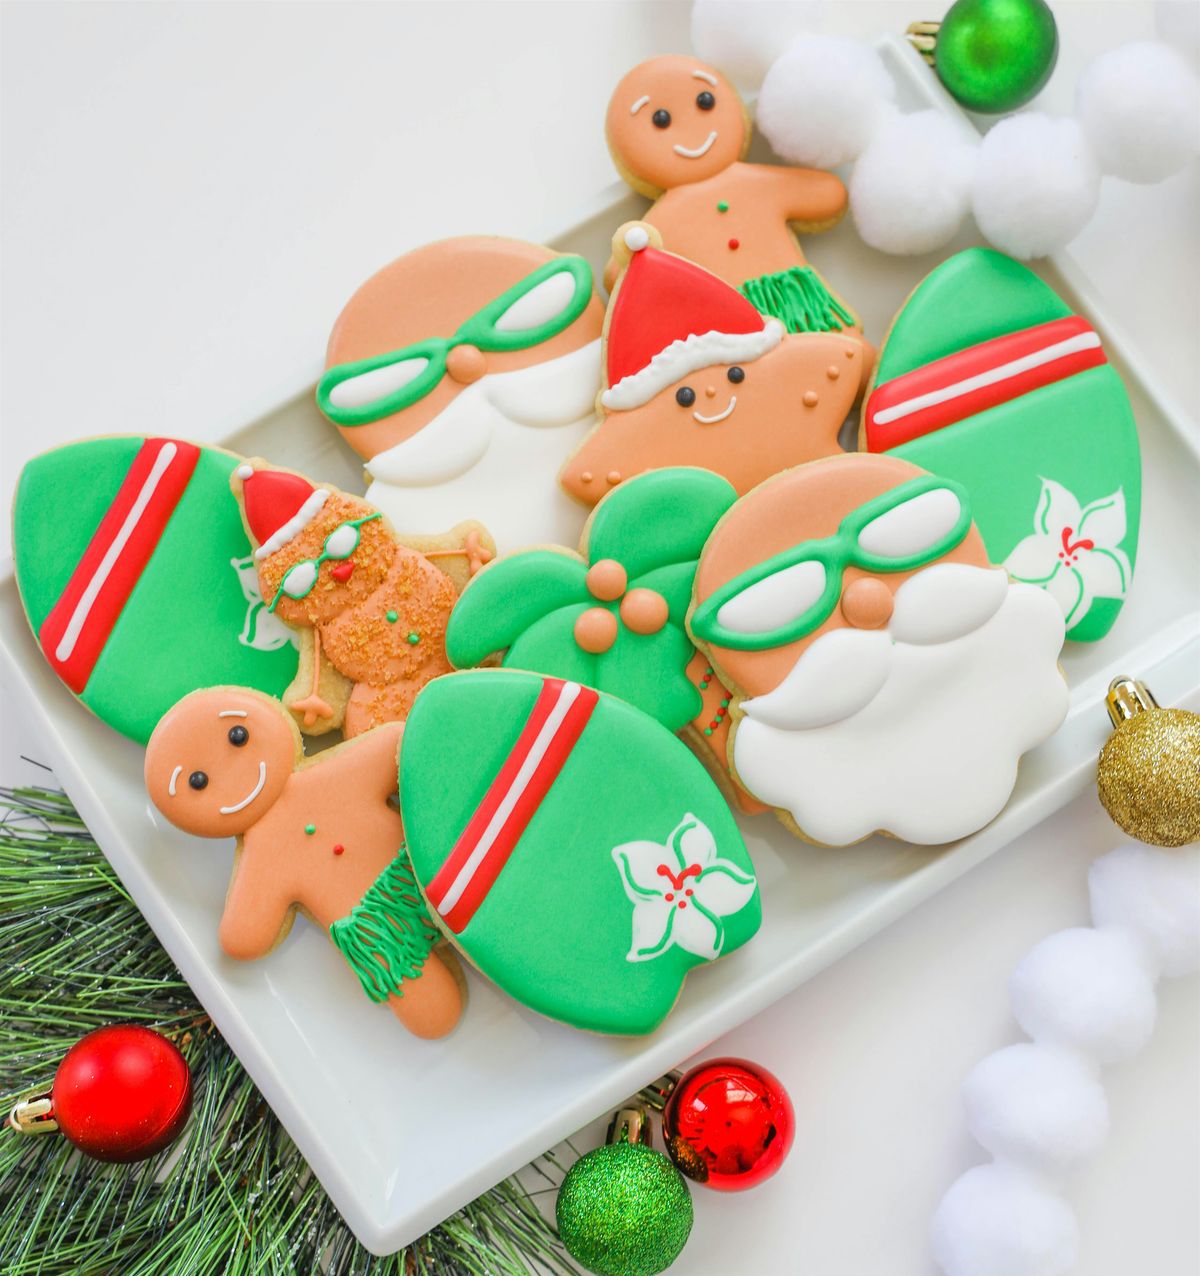 Christmas in July Sugar Cookie Decorating Class - Satire Brewing